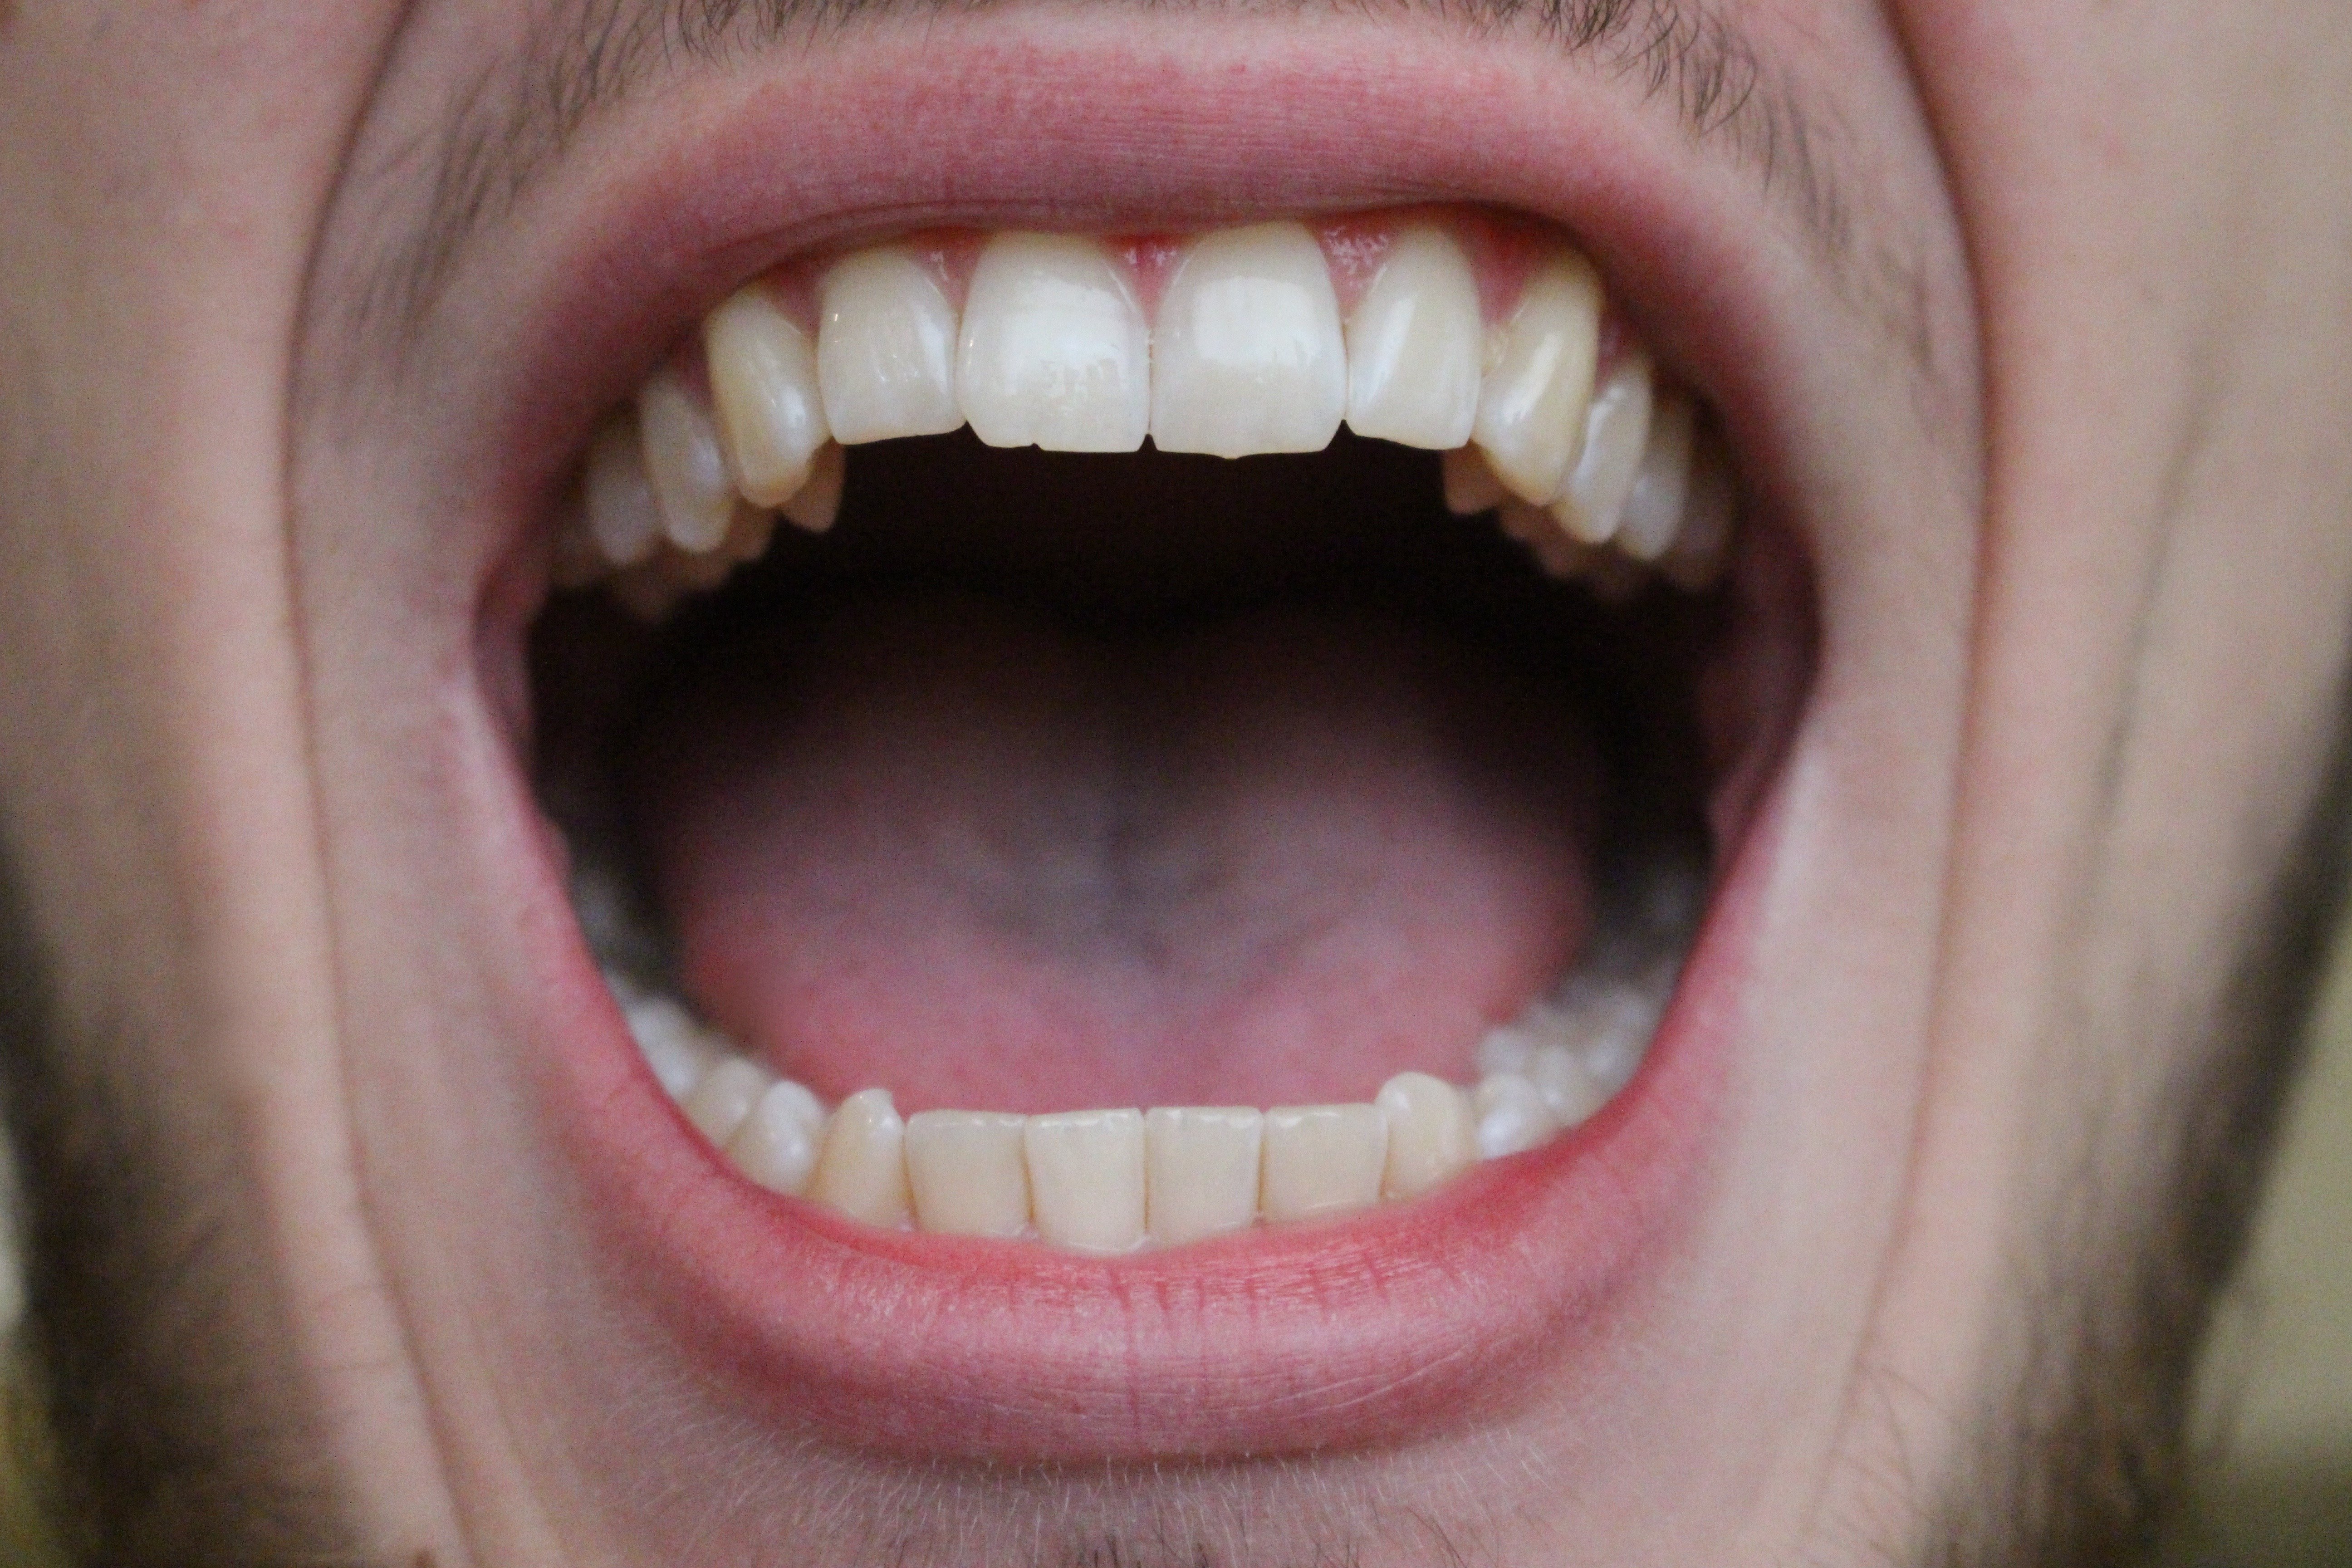 Free photo: Open mouth, Mouth, Open